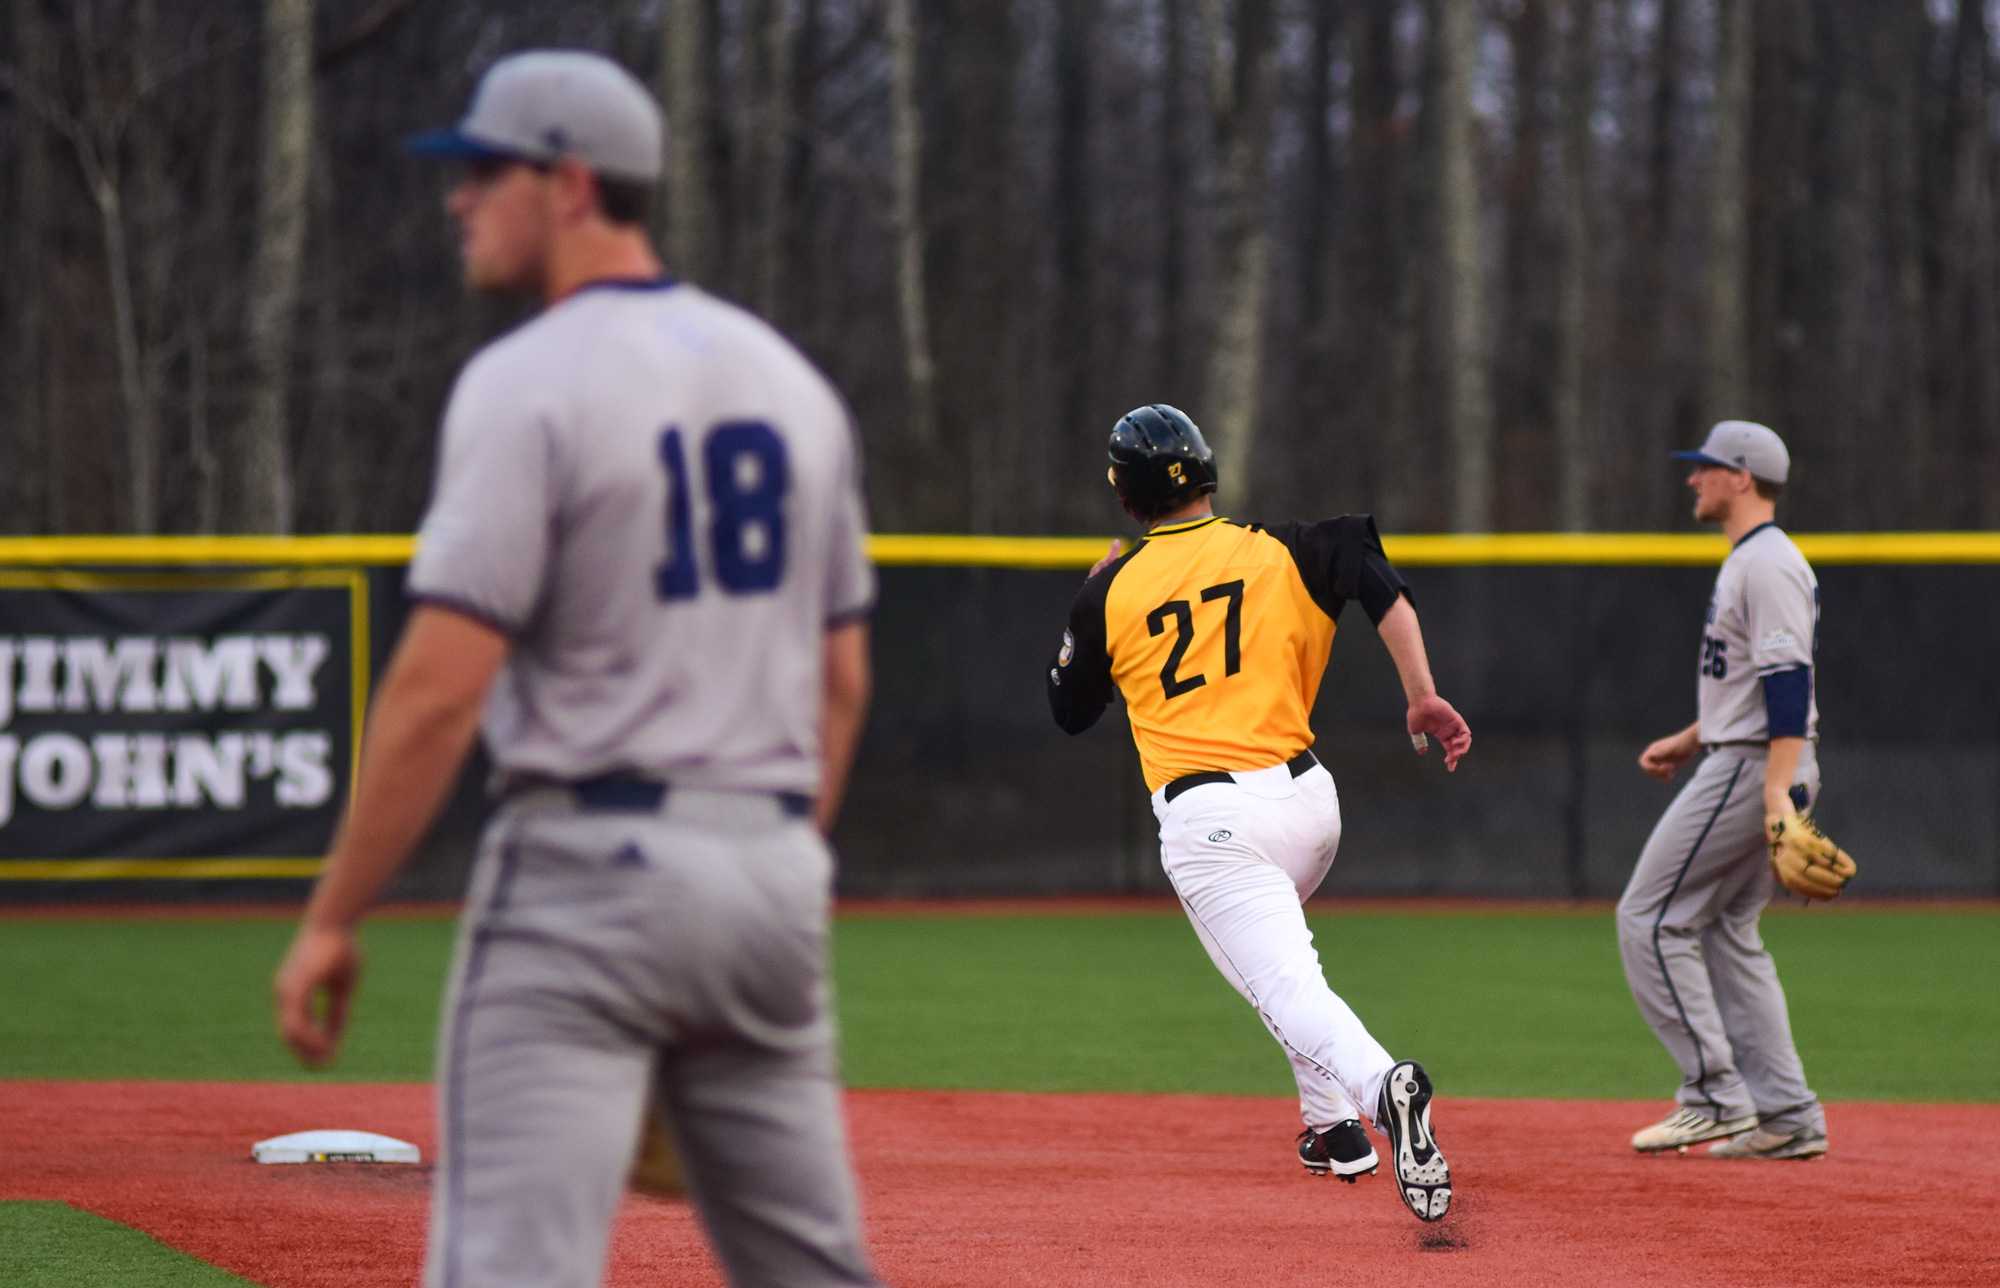 Senior infielder Grayson Atwood runs to second base. Photo by Dallas Linger, Photo Editor.